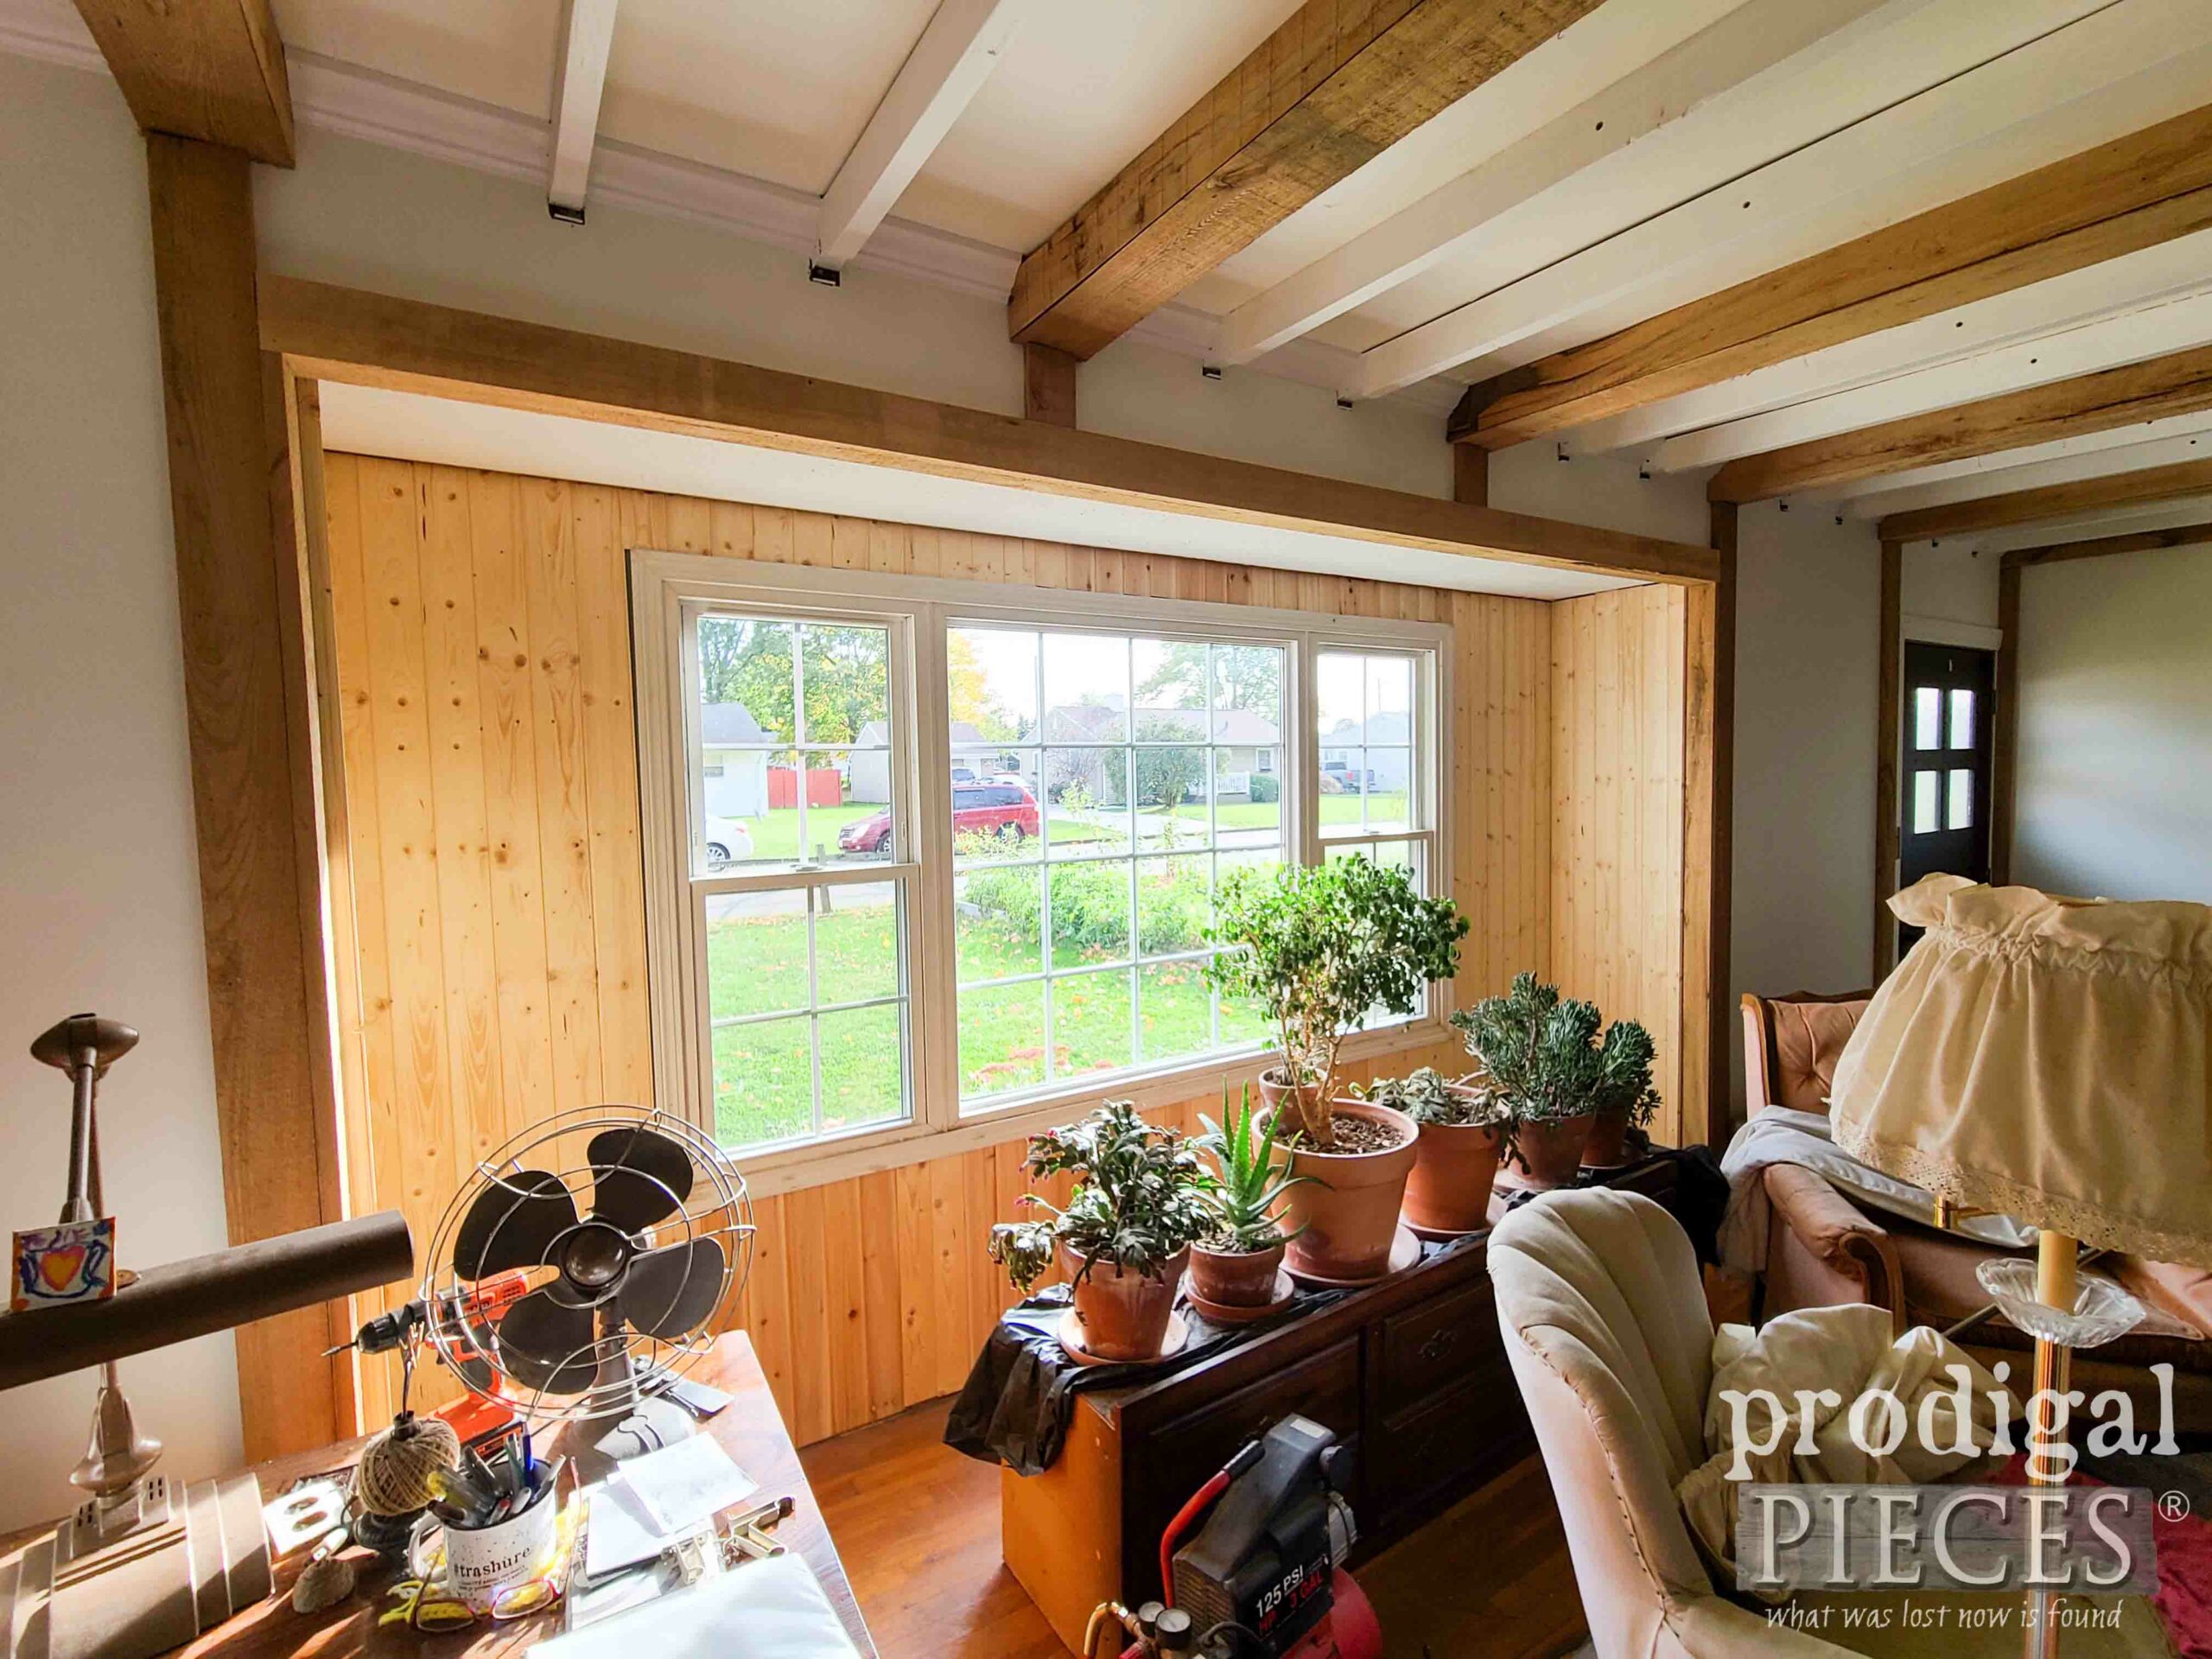 Finishing Window Walls in Living Room Remodel | prodigalpieces.com #prodigalpieces